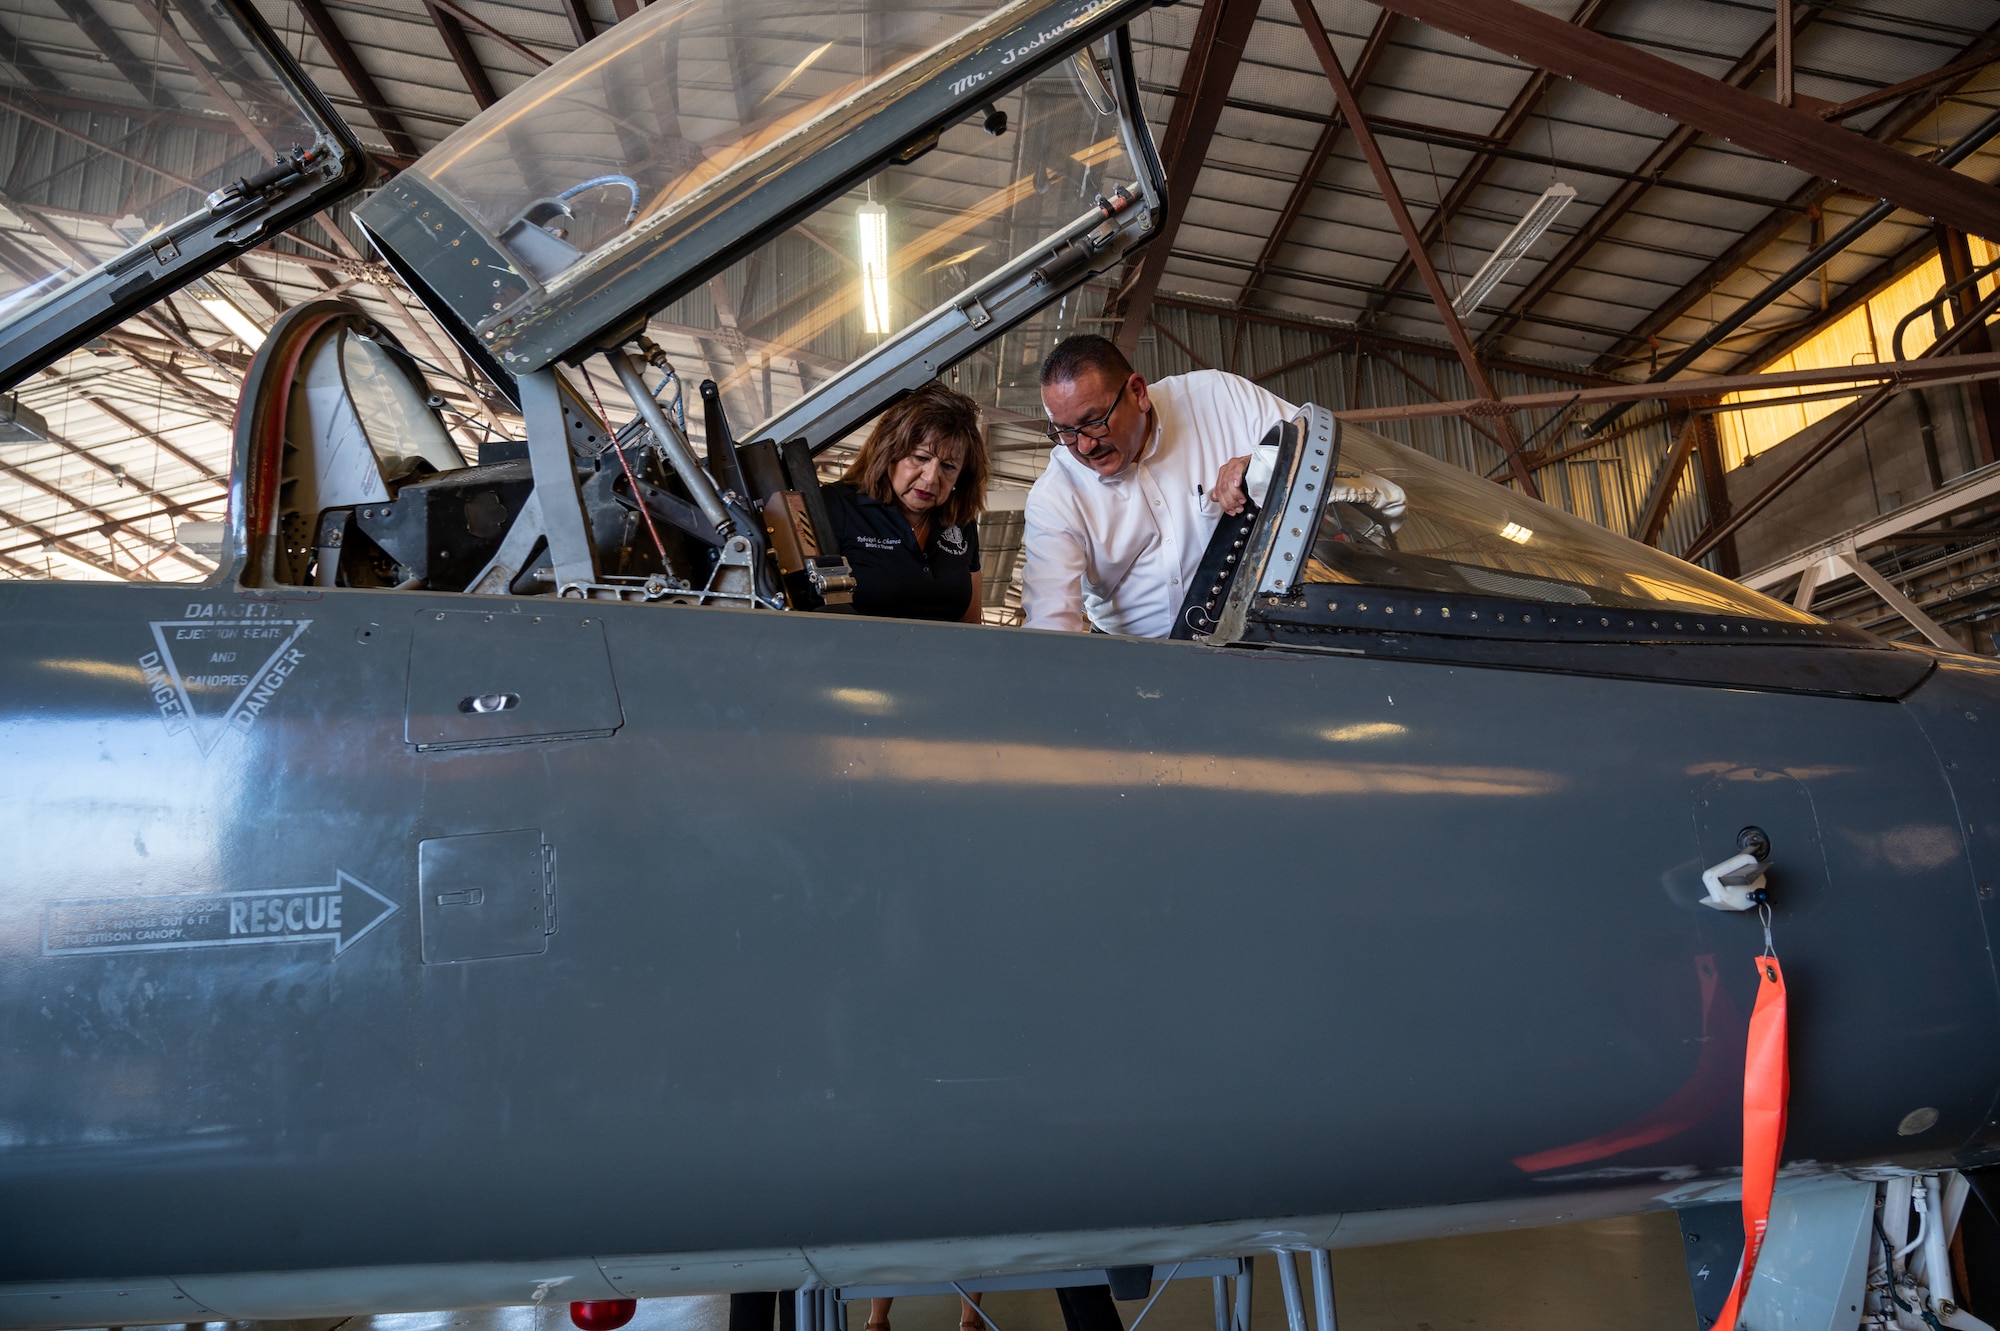 Rebekah Chavez (left), San Felipe Del Rio Consolidated Independent School District (SFDR-CISD) board of directors member, and Rene Martinez (right), 47th Maintenance Directorate supervisor, inspect the cockpit of a T-38C Talon undergoing maintenance at Laughlin Air Force Base, Texas, July 18, 2023. The Laughlin Educator Tour allowed SFDR-CISD leaders to see Laughlin's mission and discuss the future of the on-base education system. (U.S. Air Force photo by Senior Airman Nicholas Larsen)